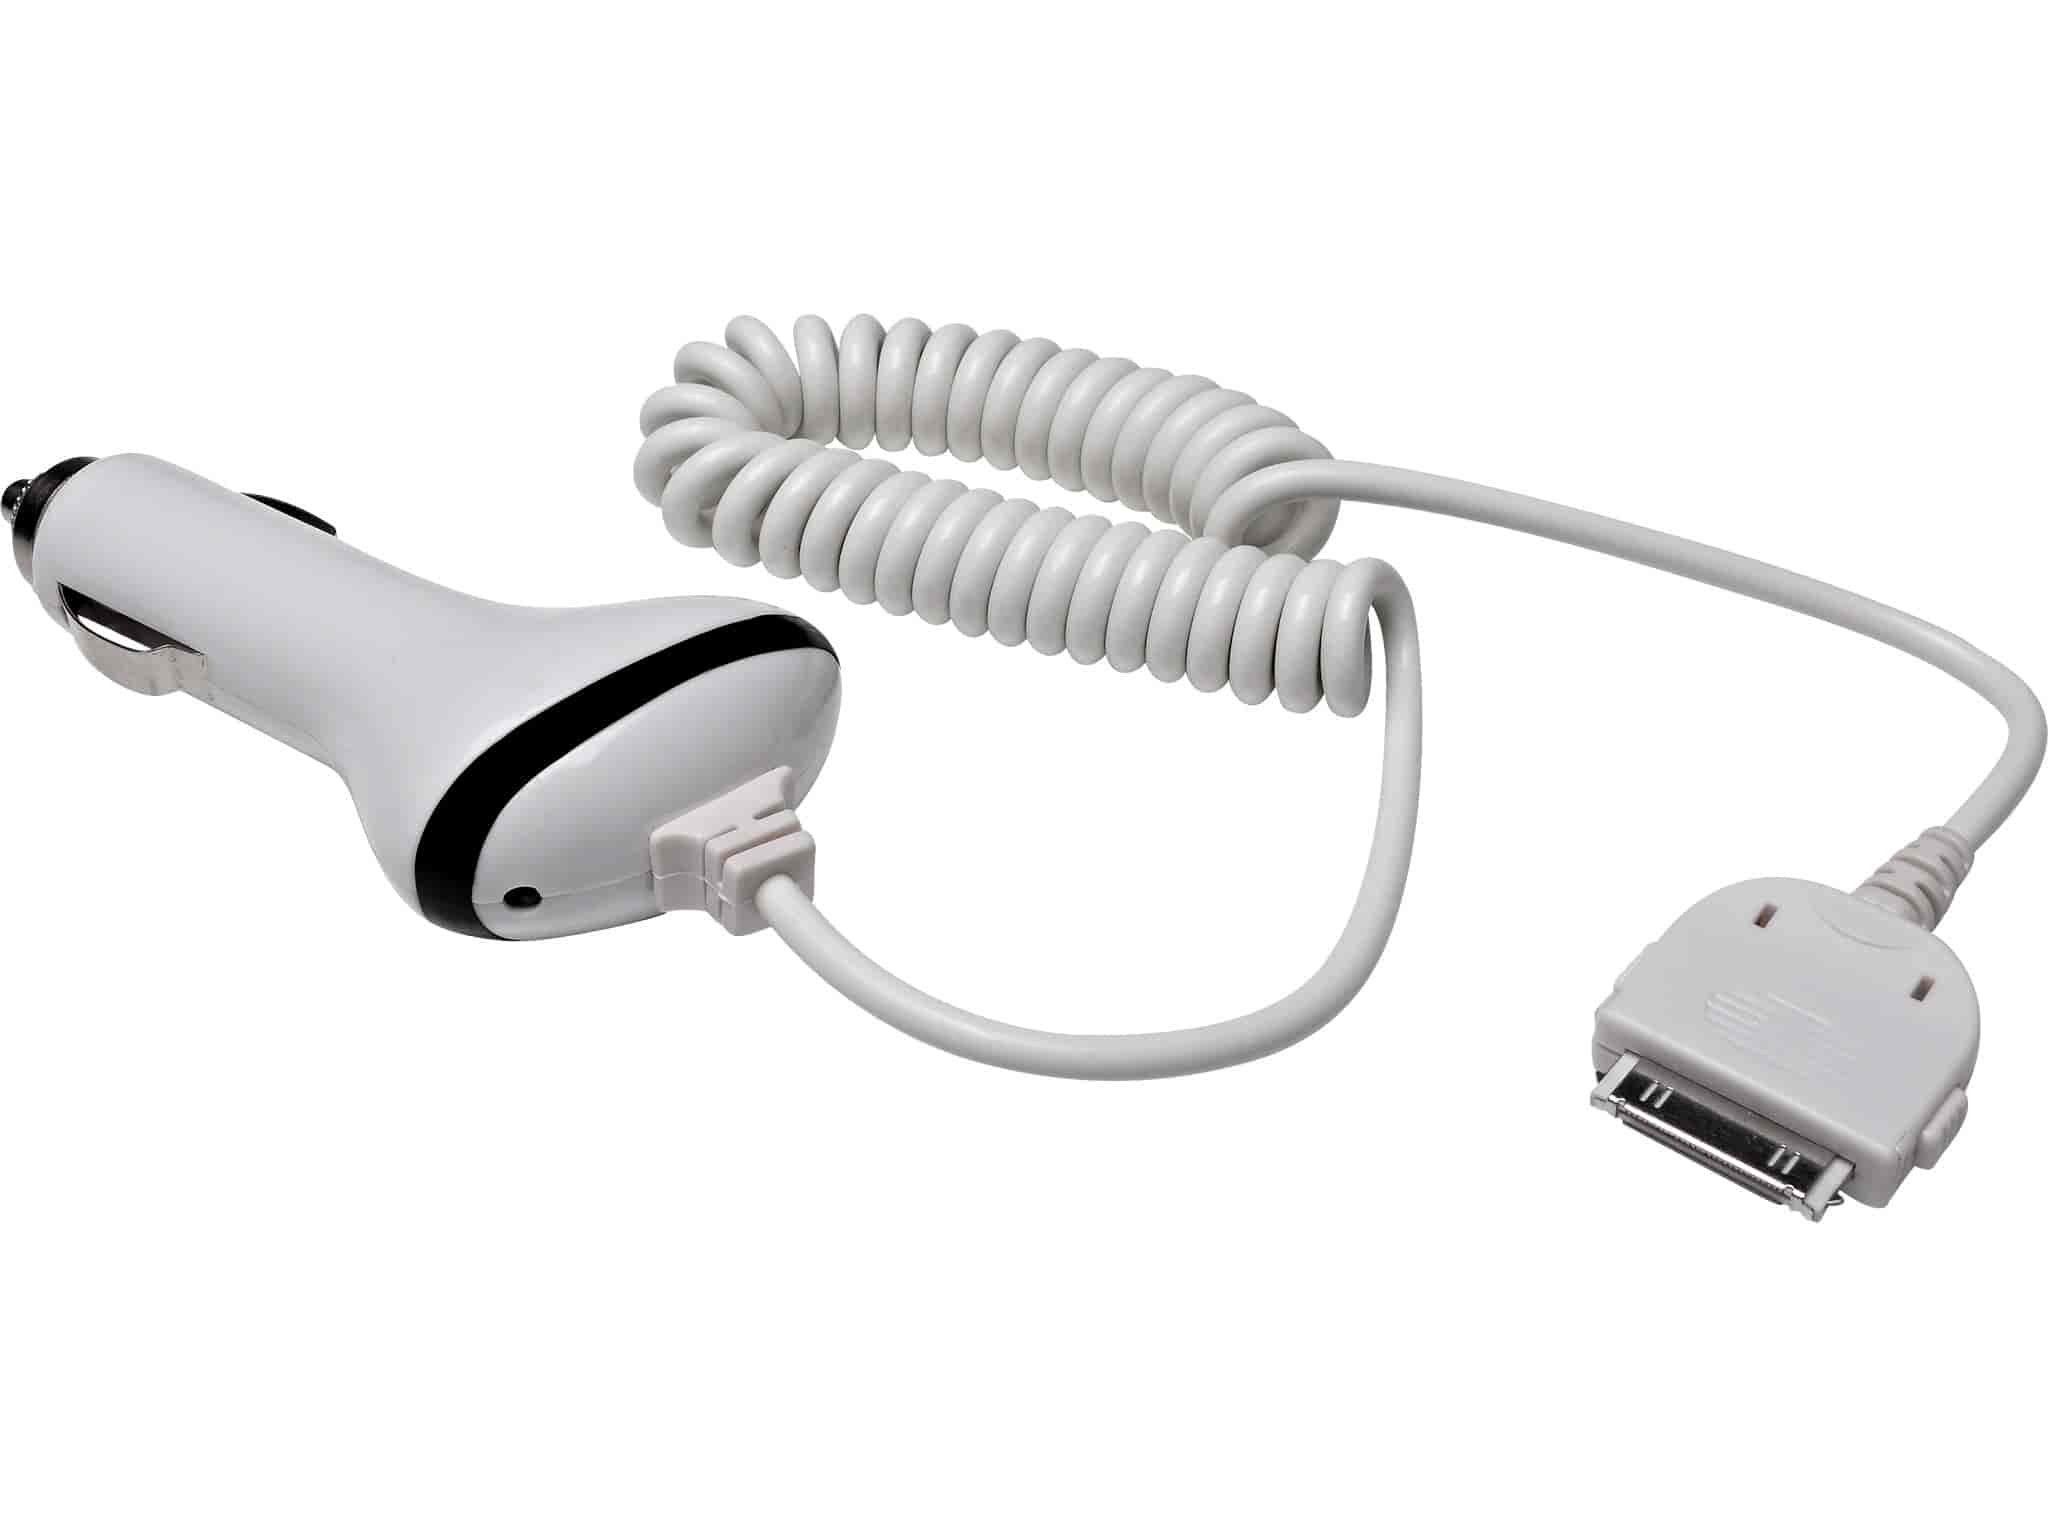 Sandberg Car charger for iPad 2100 mAWith the Sandberg Car charger for iPad, you’ll always have a charging cable to hand in your car, whether it’s your iPad, iPhone or iPod that’s running low on power.Sandberg